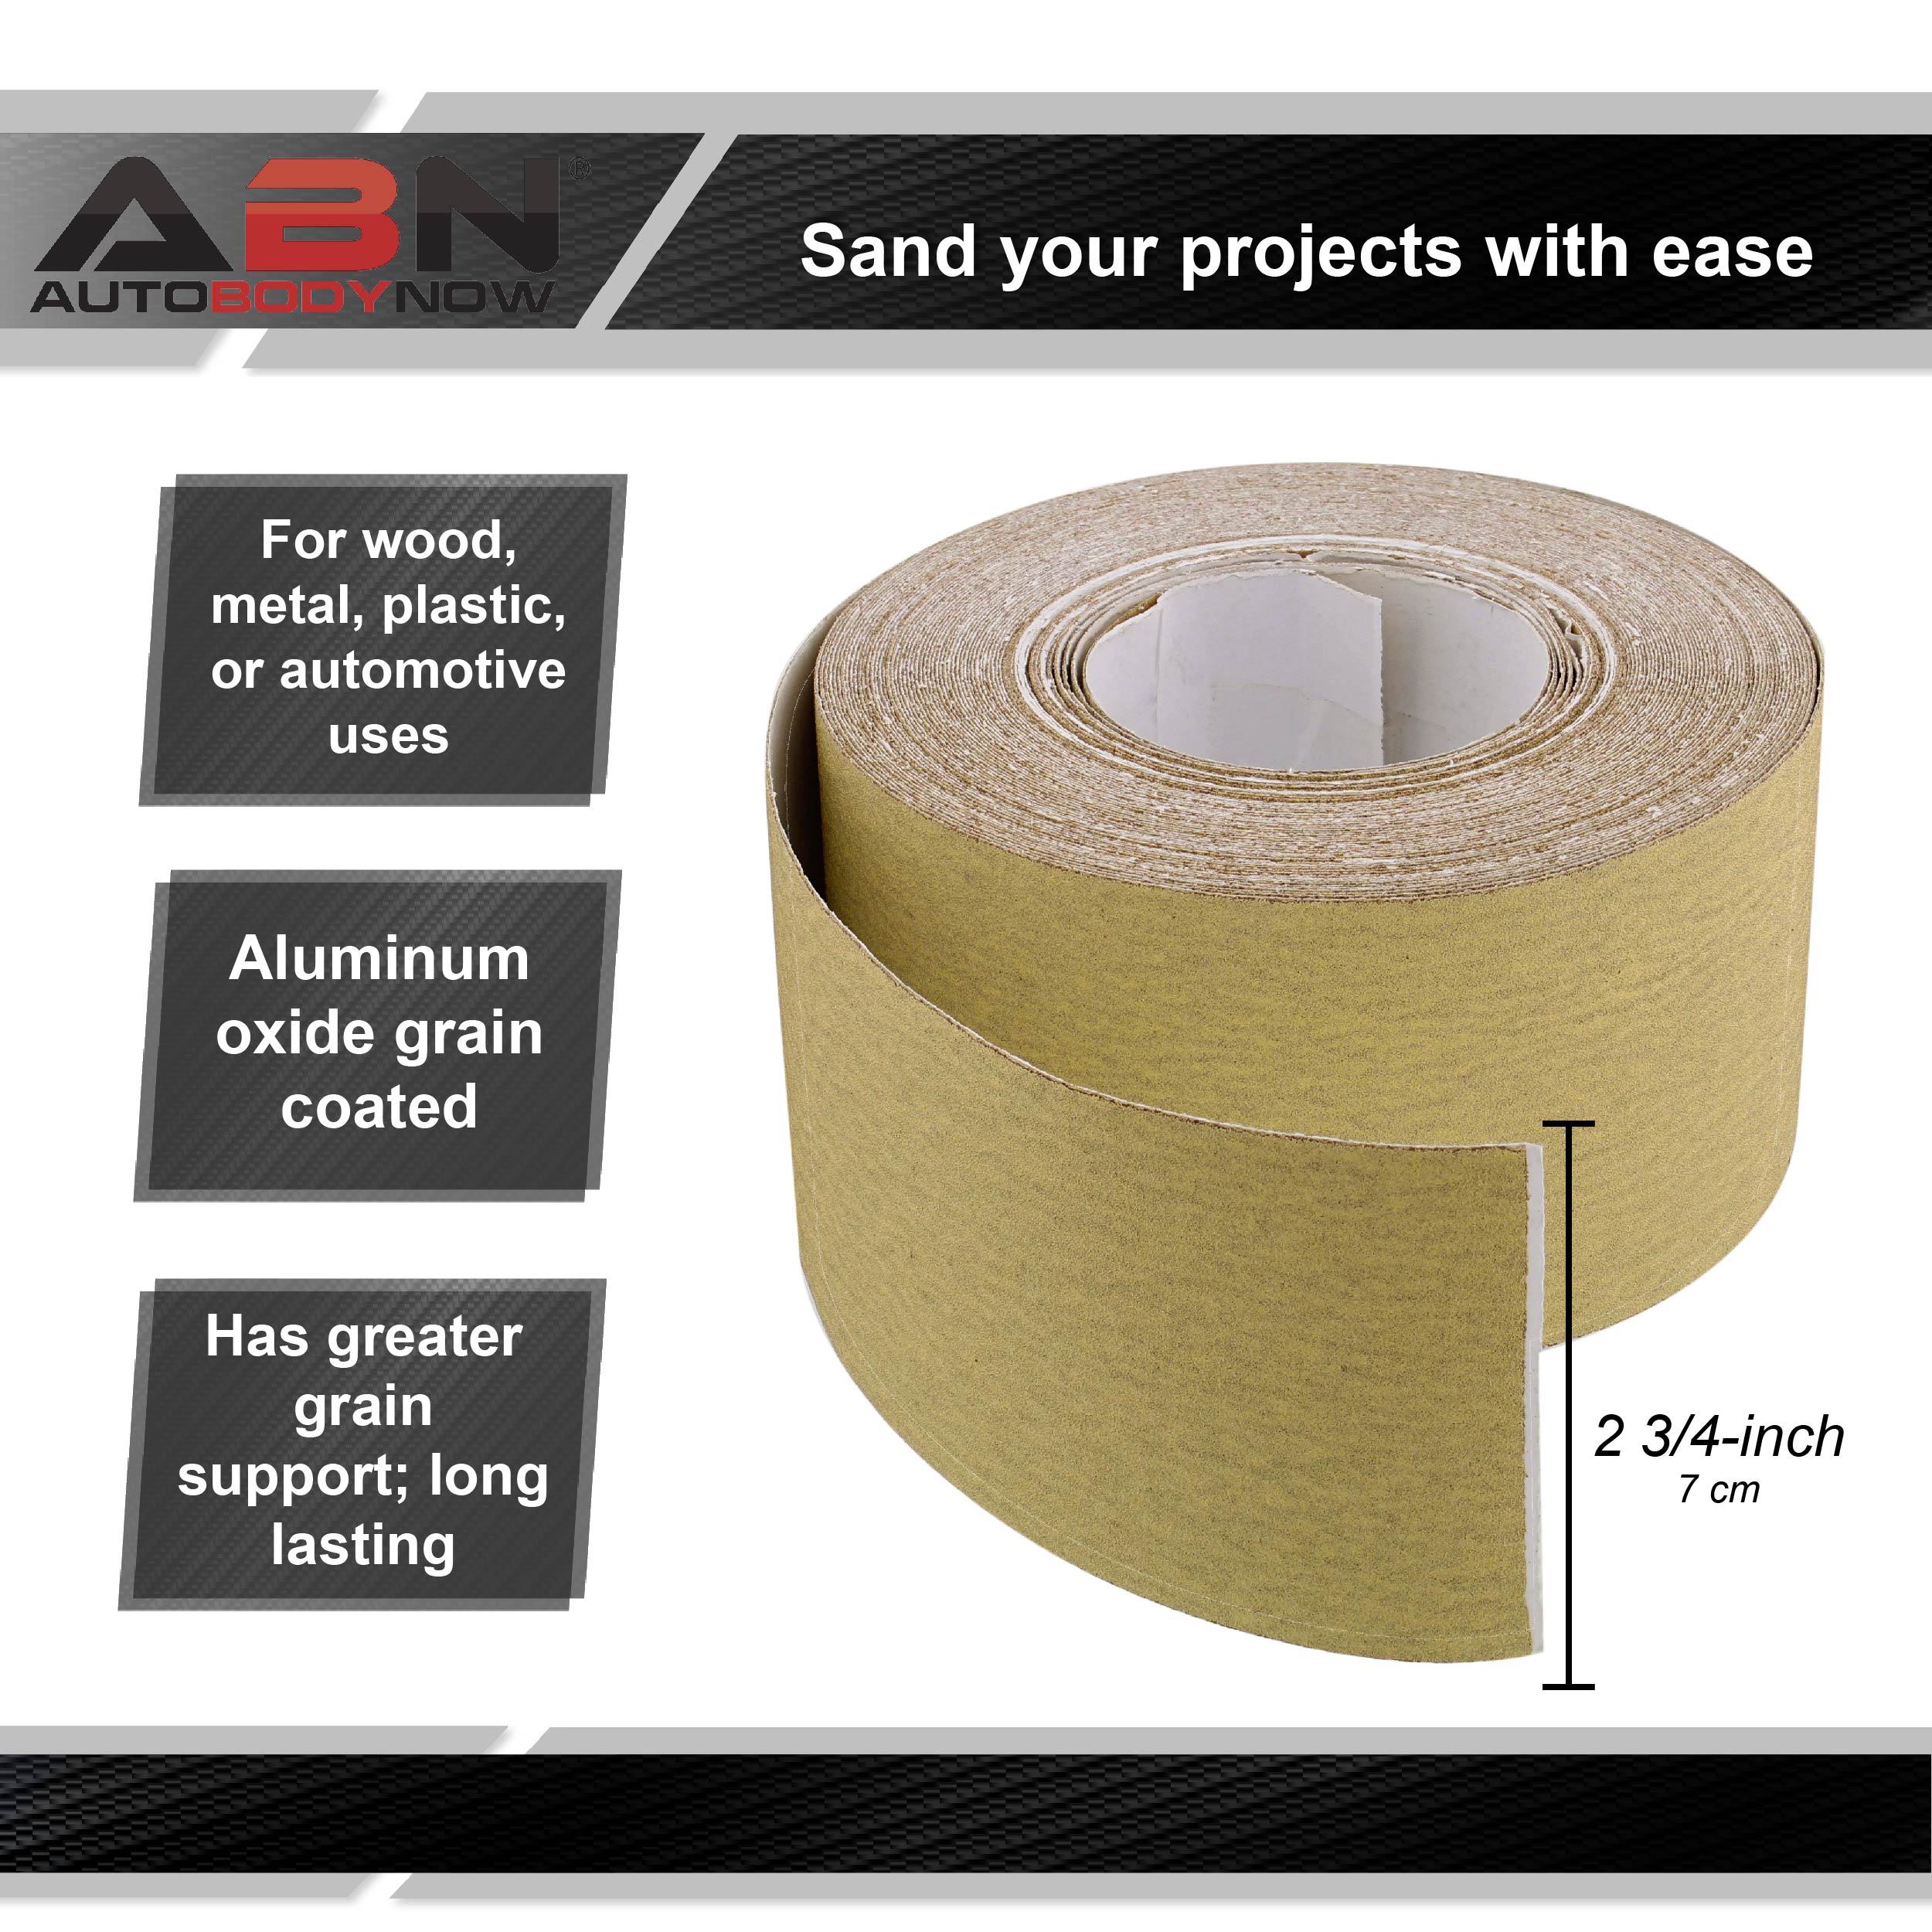 Adhesive 400-Grit Aluminum Oxide Sandpaper Roll 2-3/4” Inch x 20 Yards